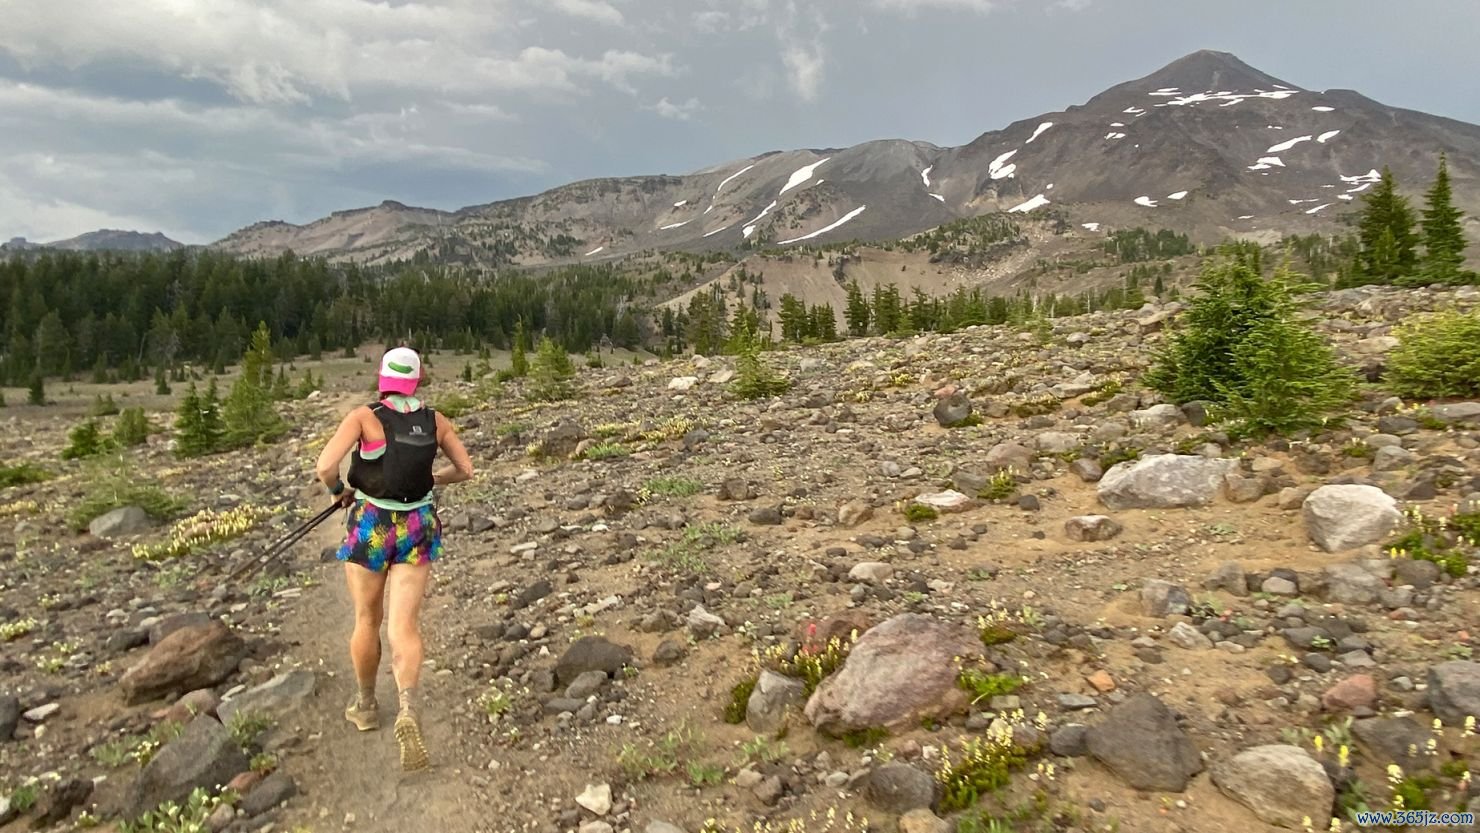 Running along the Pacific Crest Trail in Oregon was one of the best places for author Emily Halnon to process her grief after the loss of her mother to cancer.